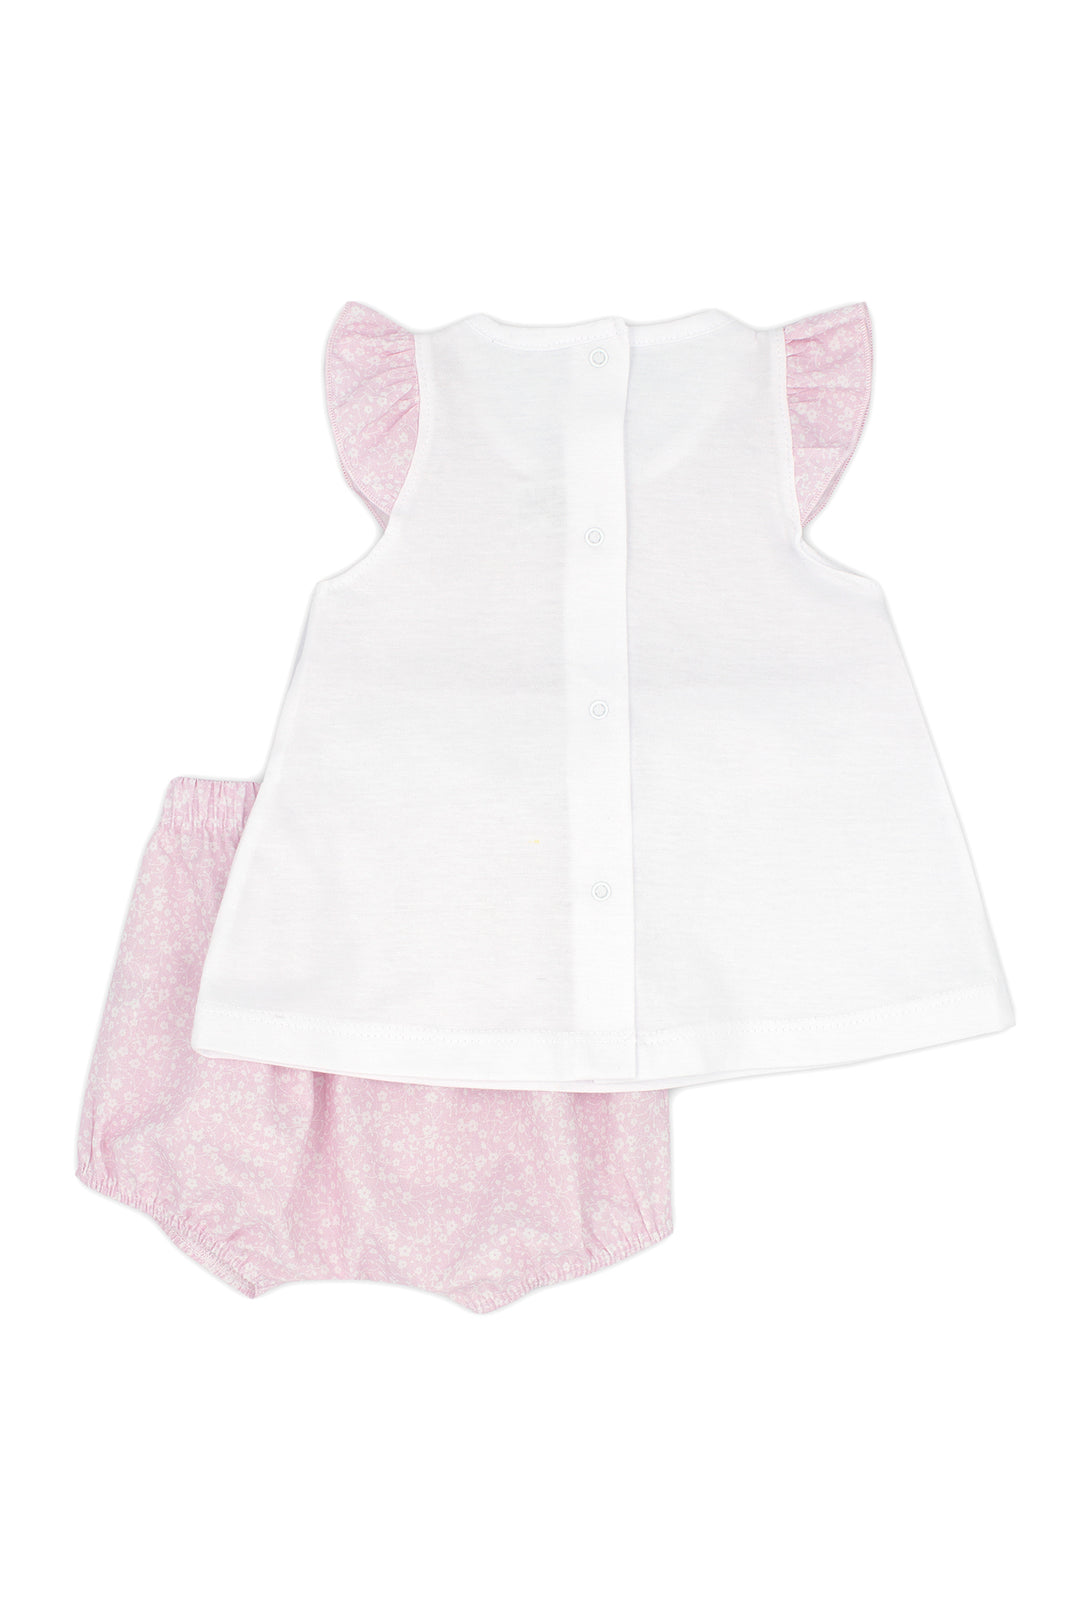 Rapife "Cressida" Pink Floral Top & Bloomers | Millie and John